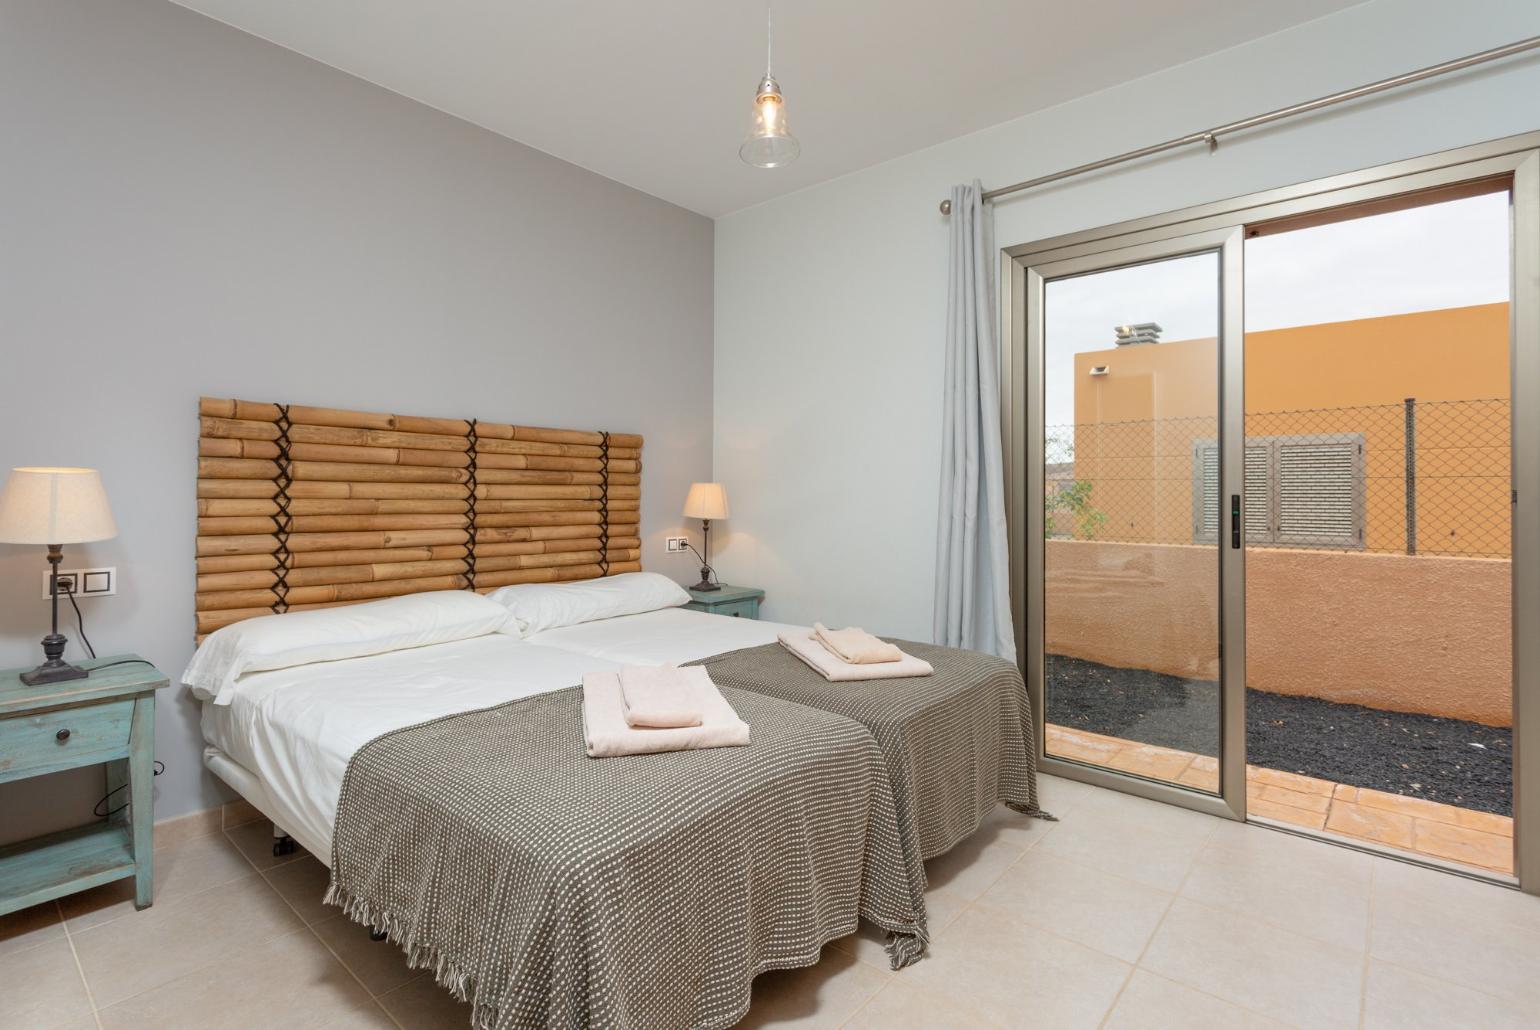 Twin bedroom with pool terrace access